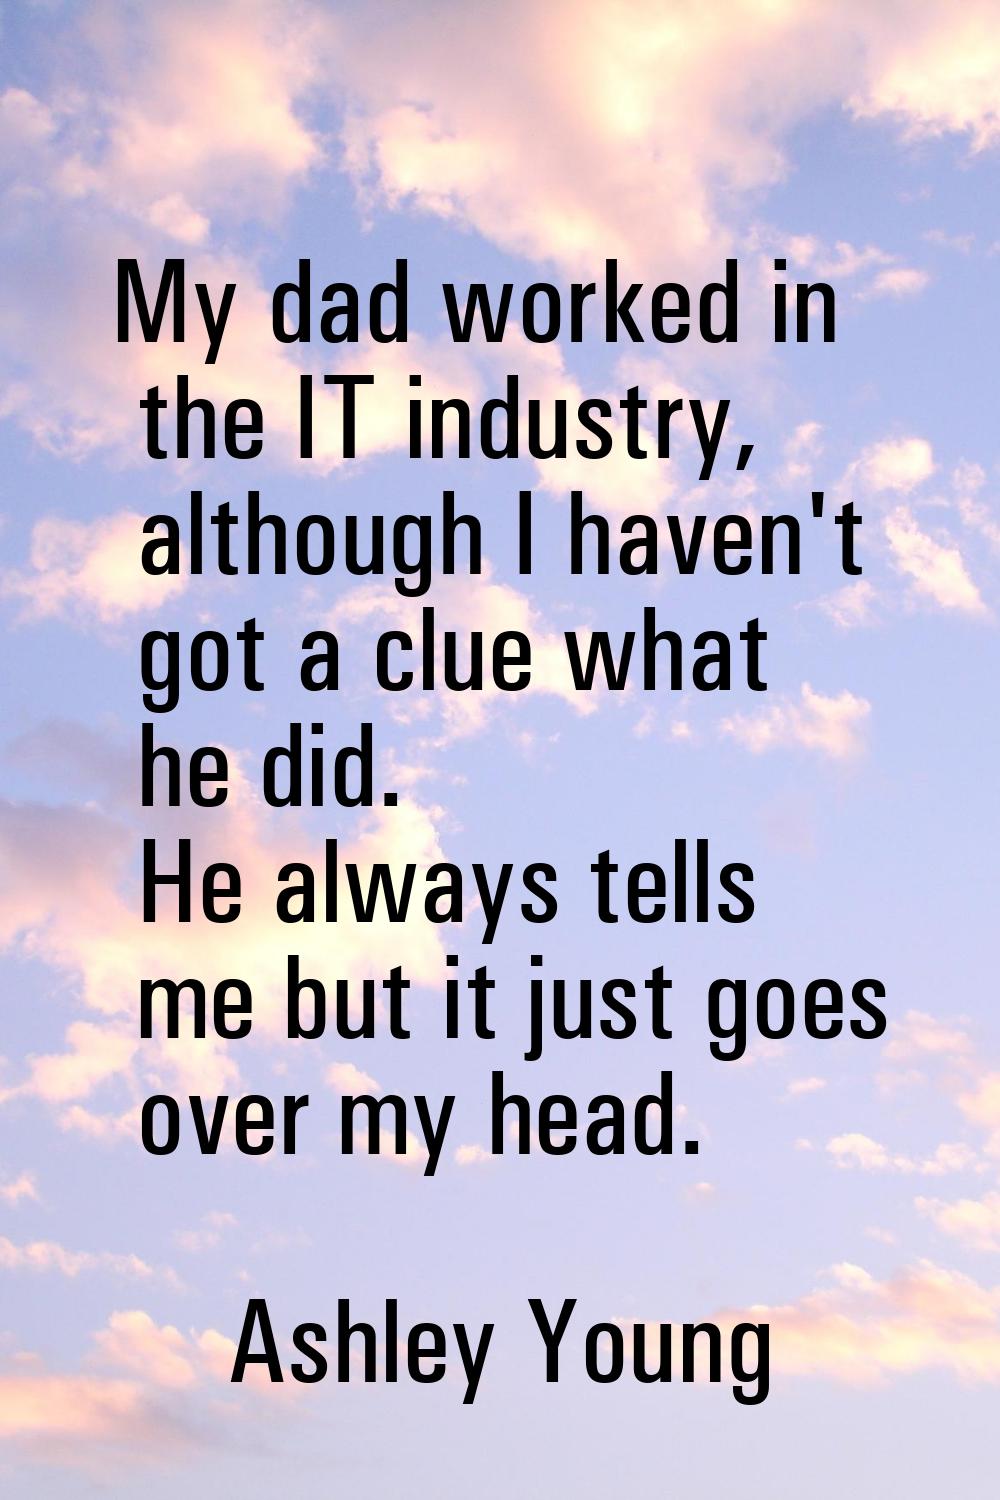 My dad worked in the IT industry, although I haven't got a clue what he did. He always tells me but